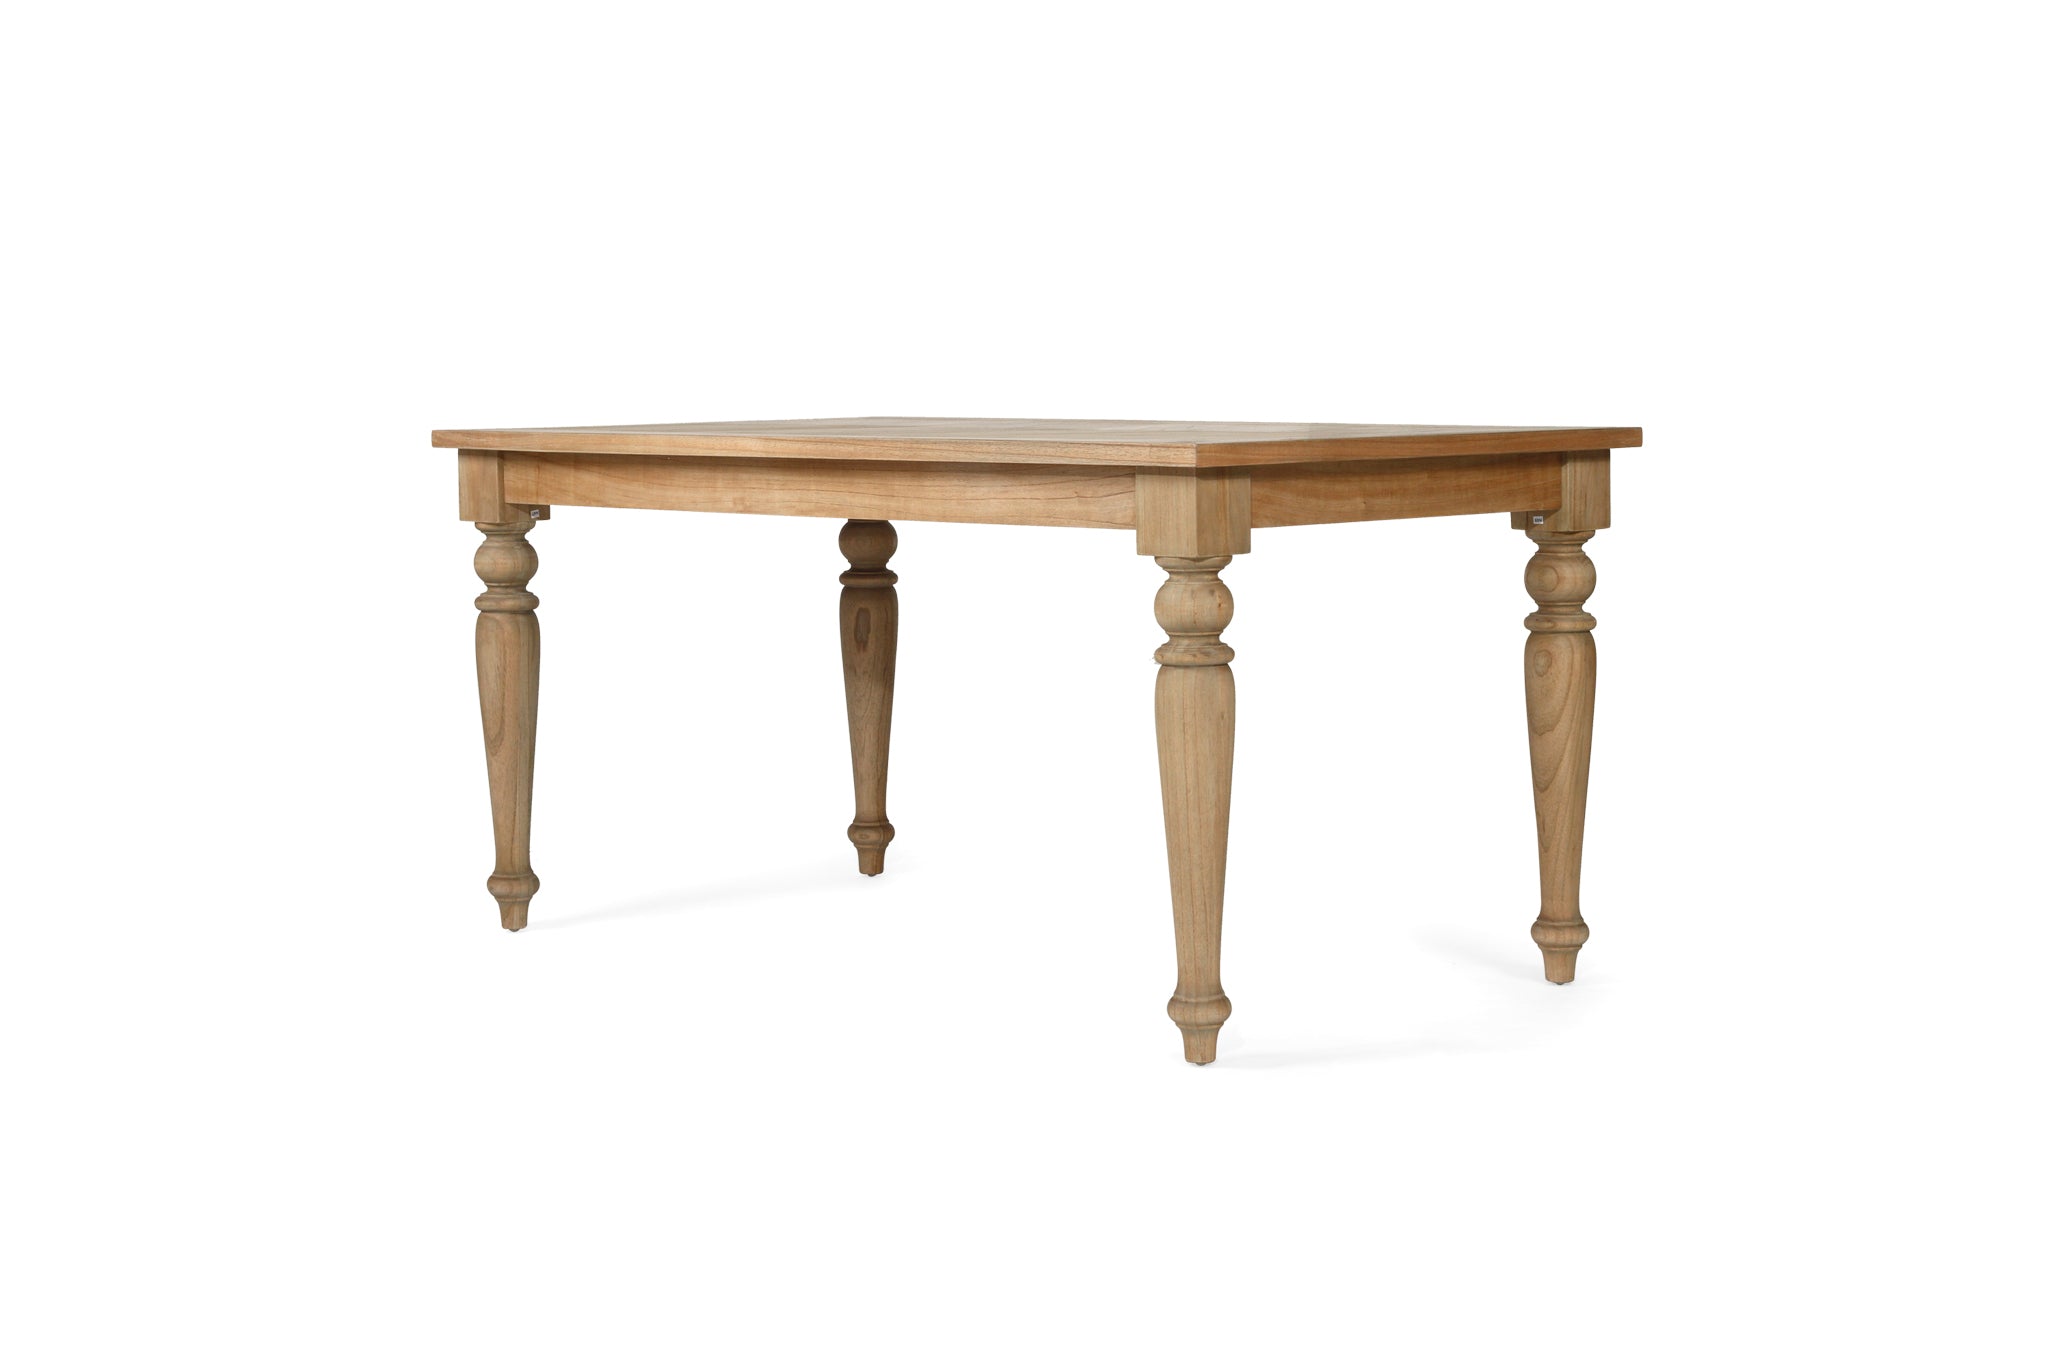 Brian Old Wood Dining Table – 2.0m